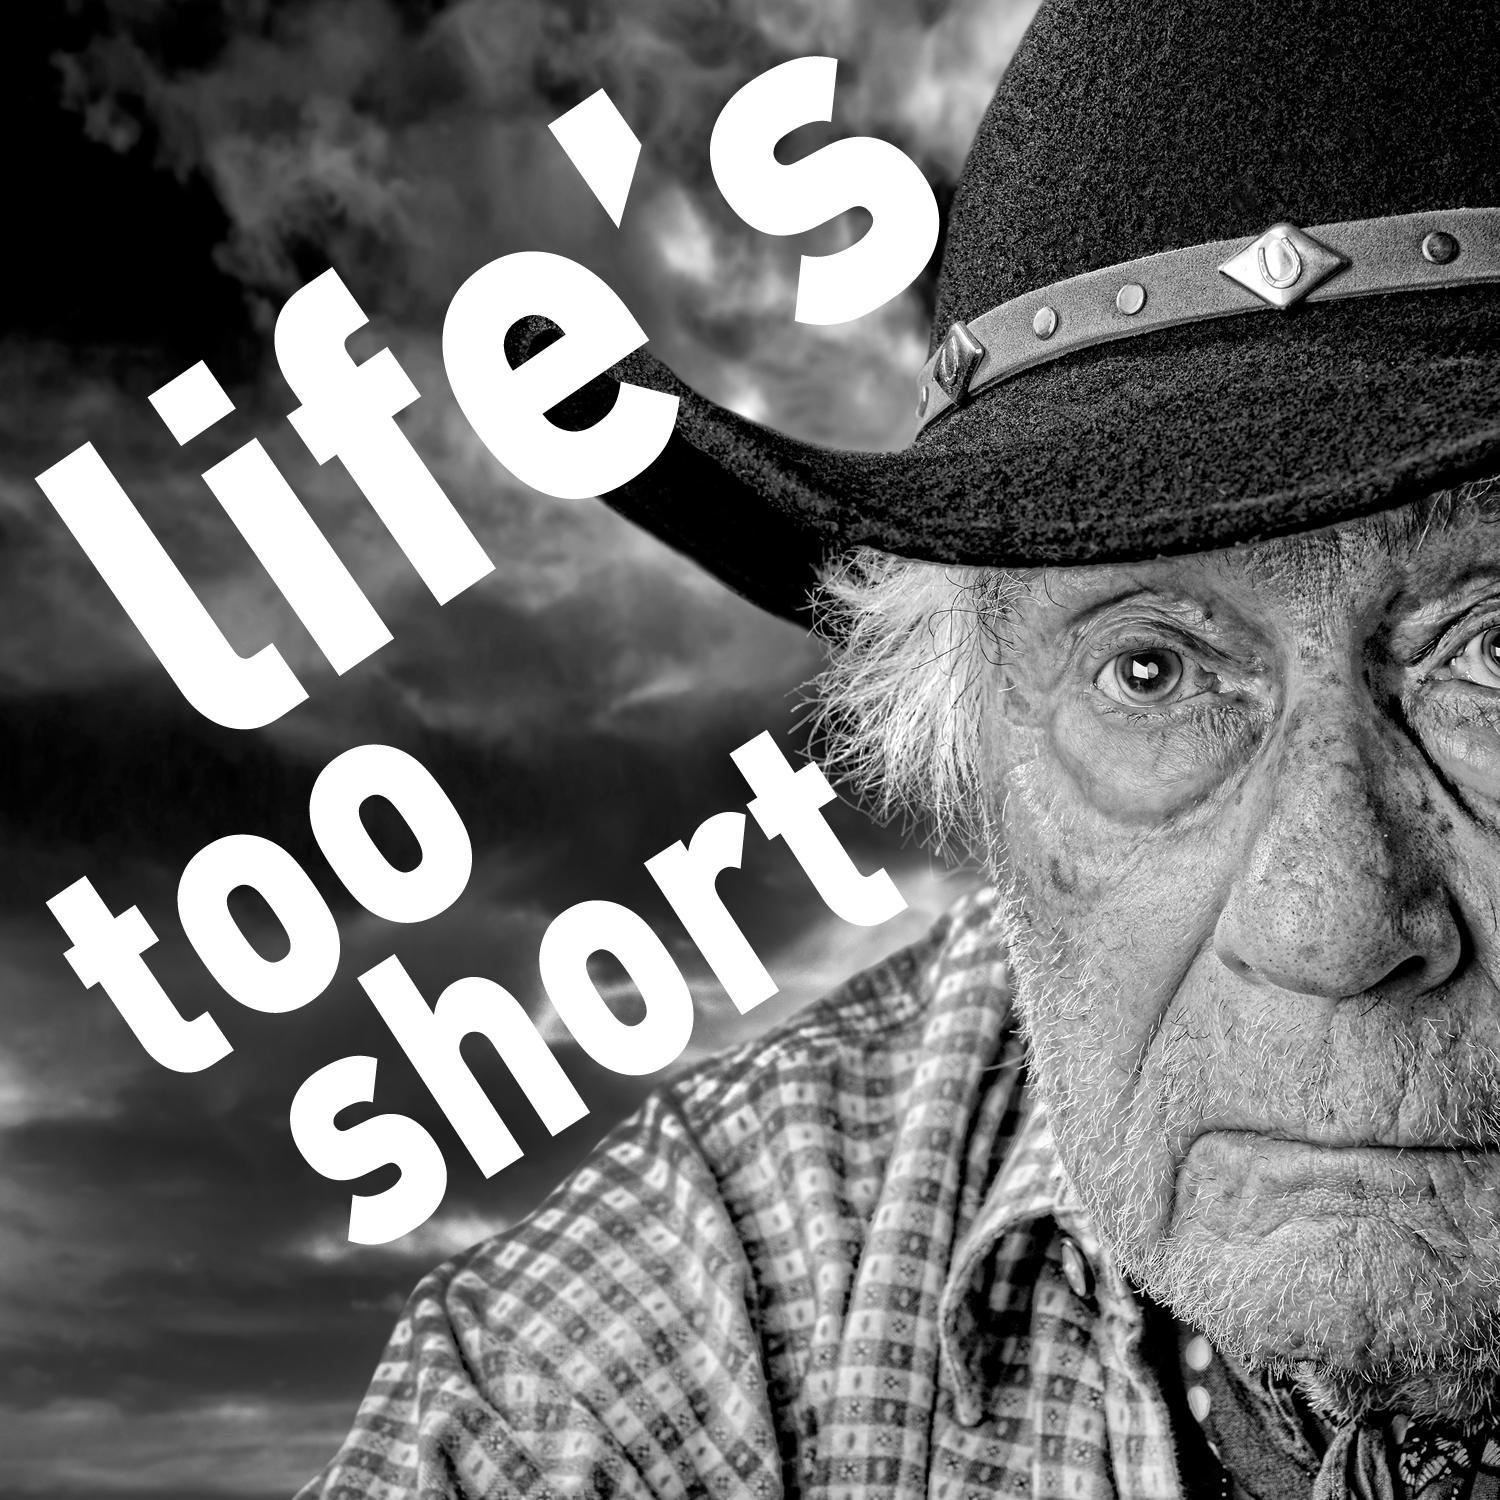 Life's Too Short - Downbeat, Sad Country for Healing Autumn Hearts with Johnny Cash, Hank Williams, Merle Haggard, The Carter Family, And More!